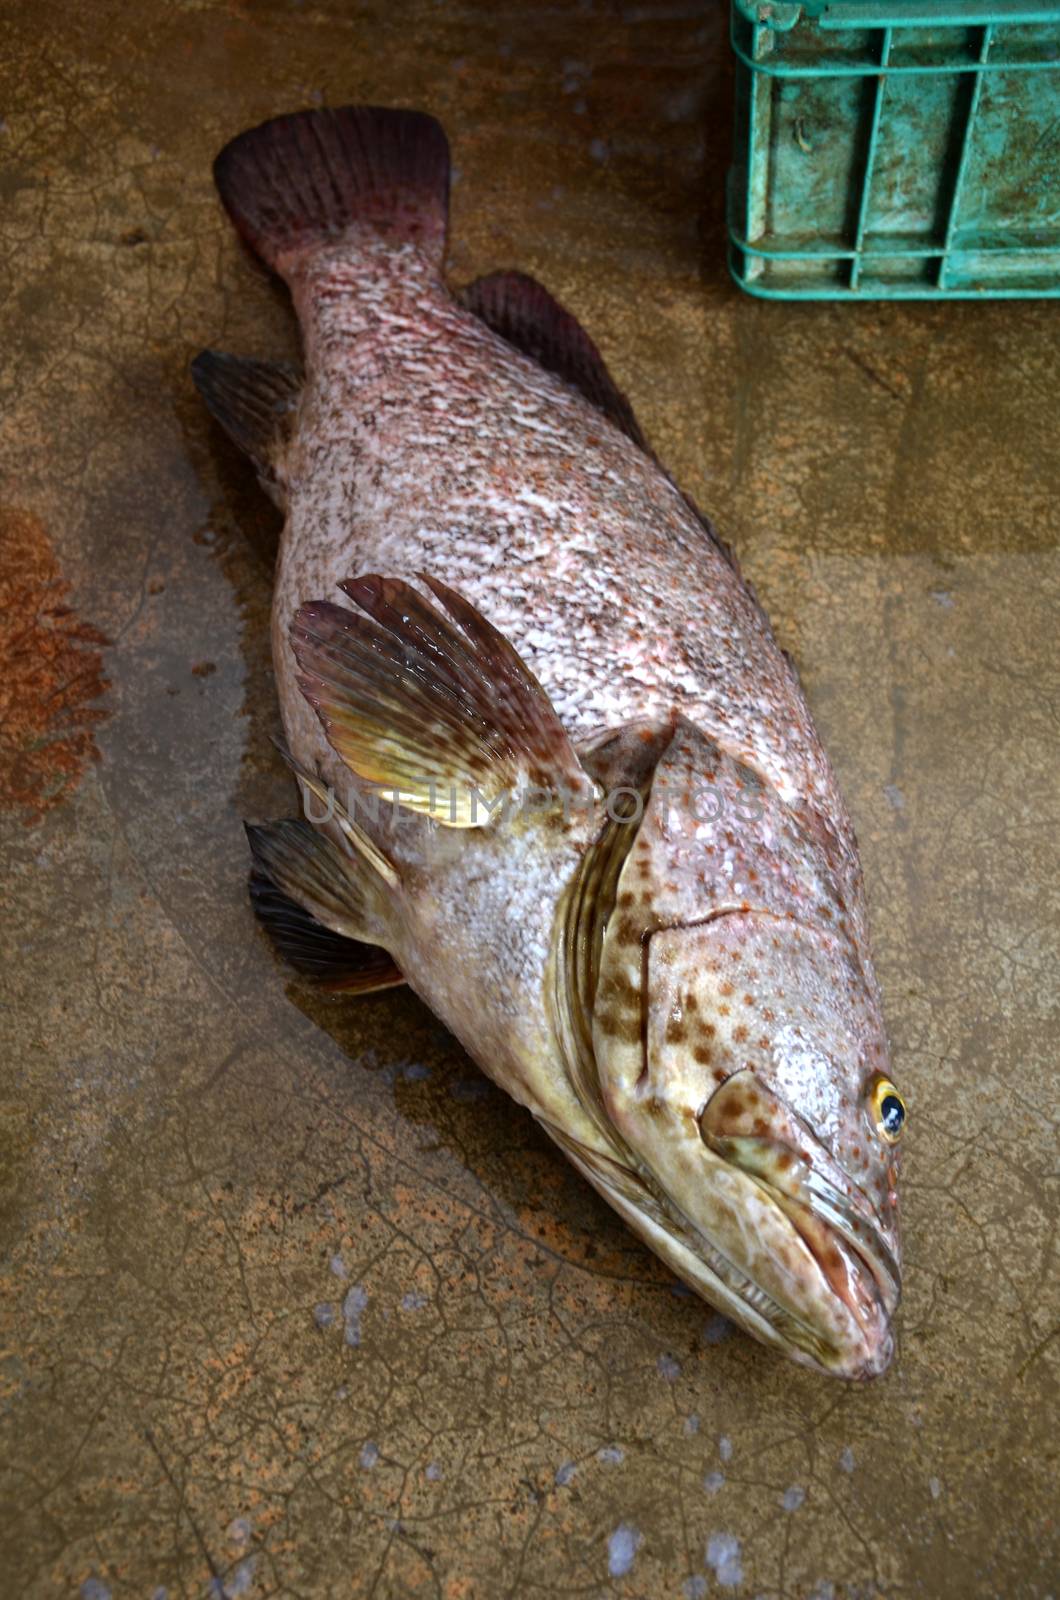 Freshly catched grouper fish in the market